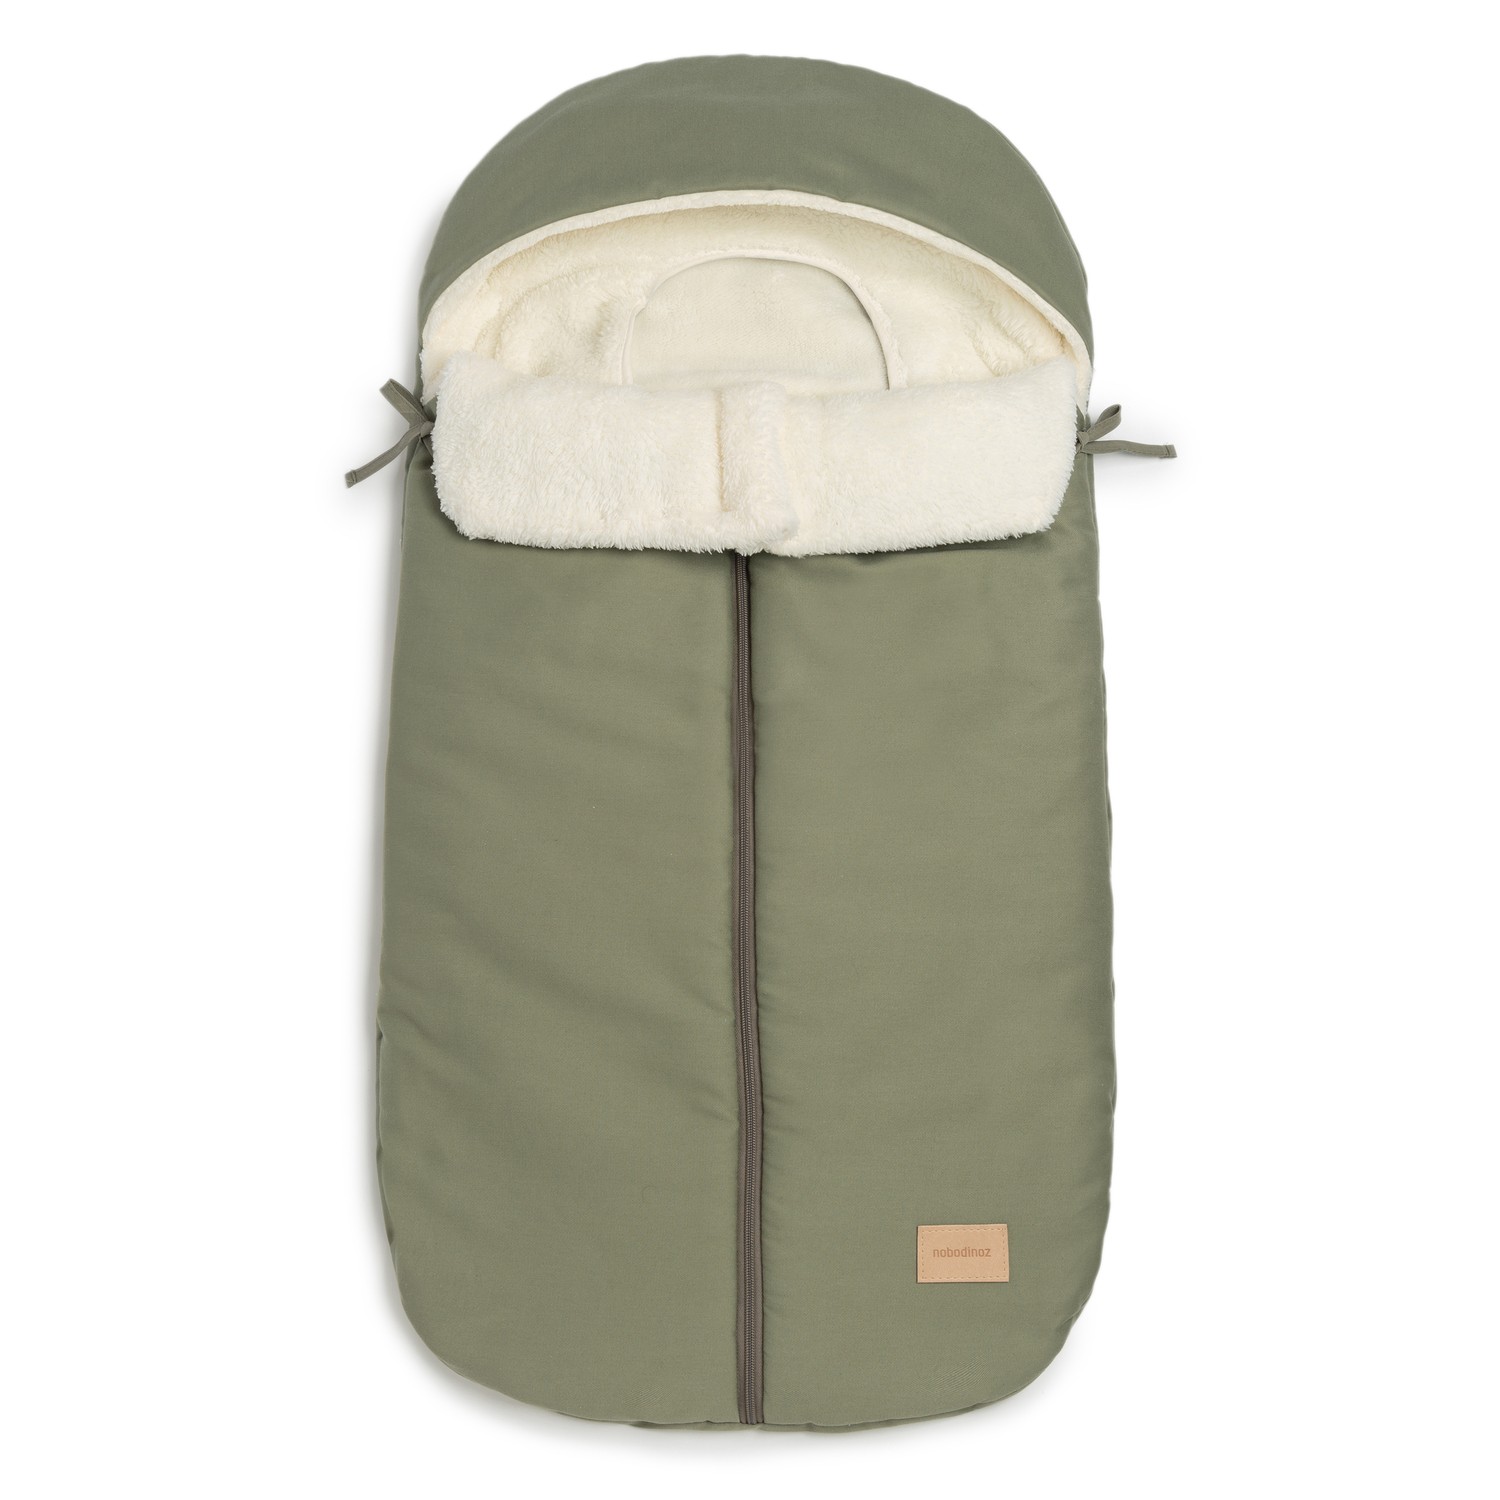 chanceliere-baby-on-the-go-olive-green-nobodinoz.c216jp.max